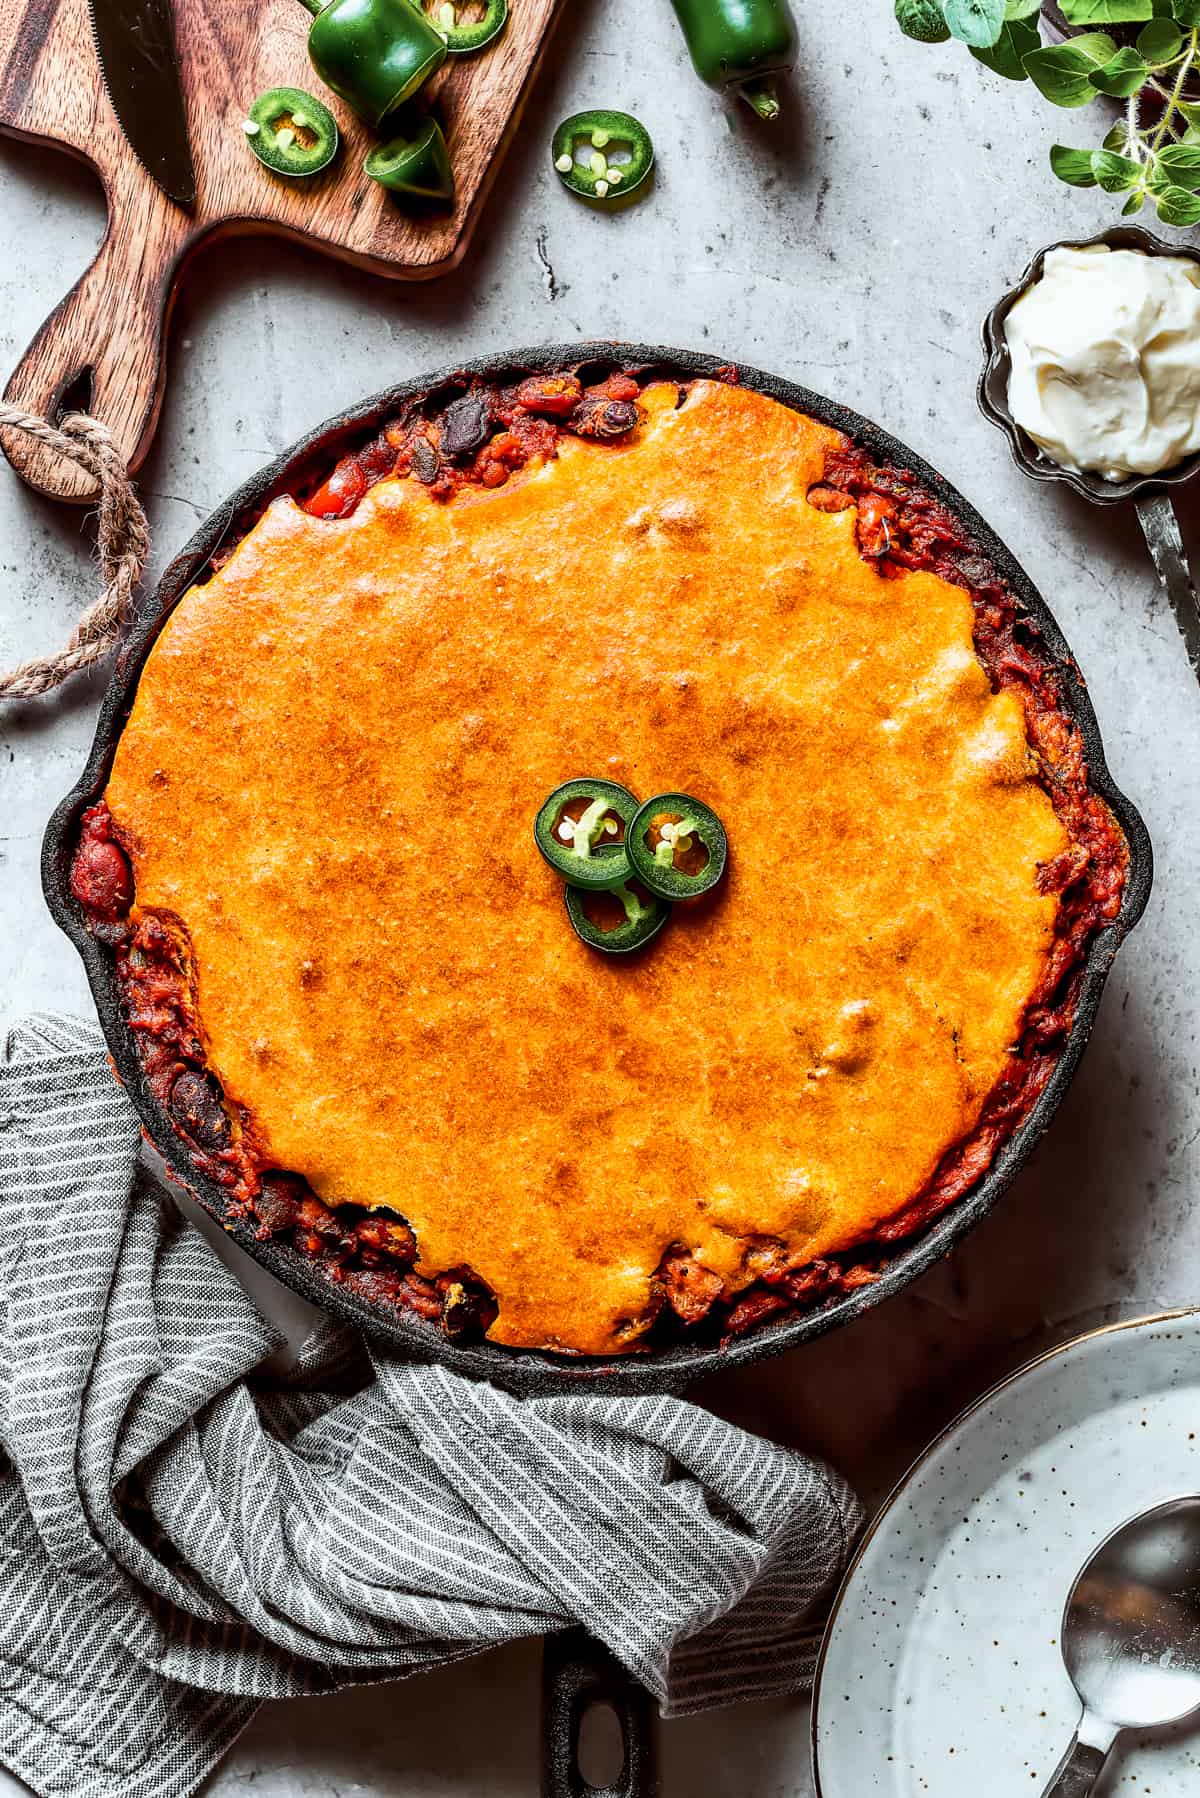 Chili with cornbread baked on top, garnished with jalapenos.